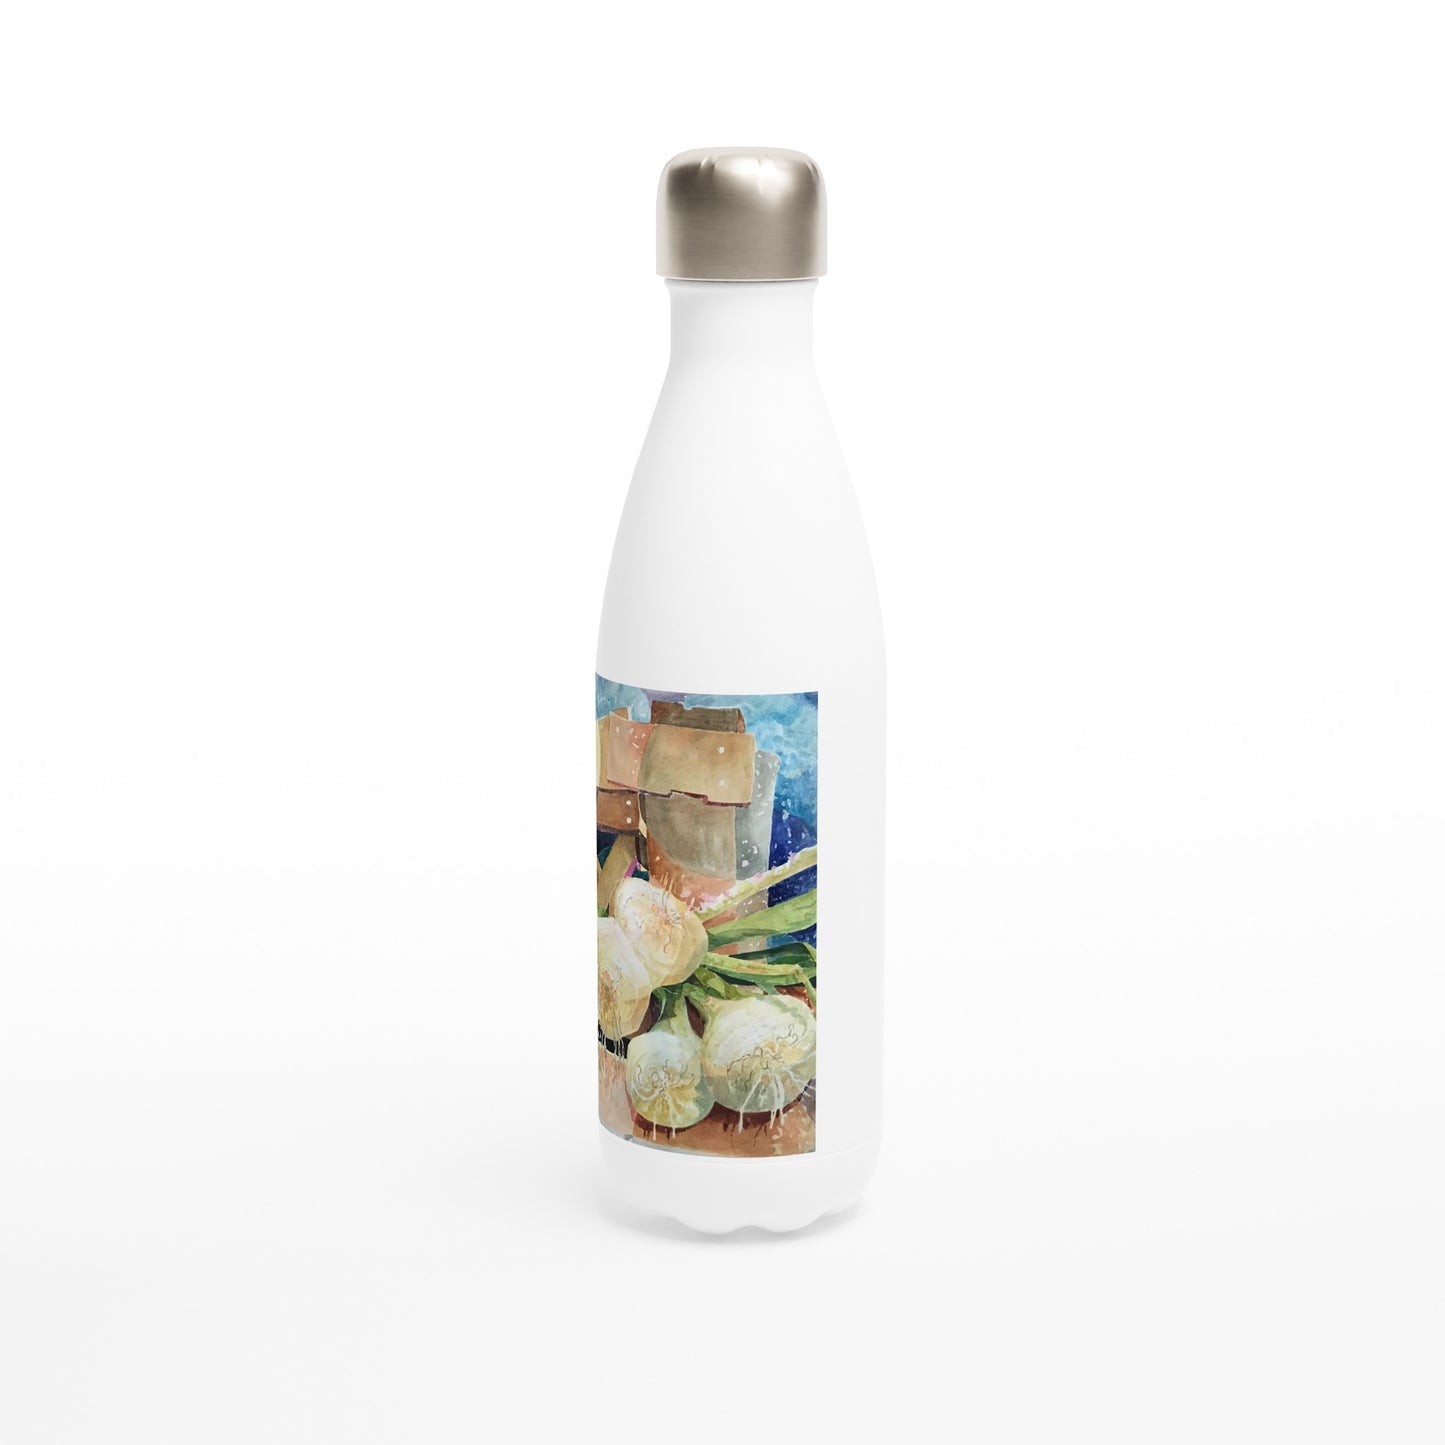 "Onions" Watercolor White 17oz Stainless Steel Water Bottle by Barbara Cleary Designs